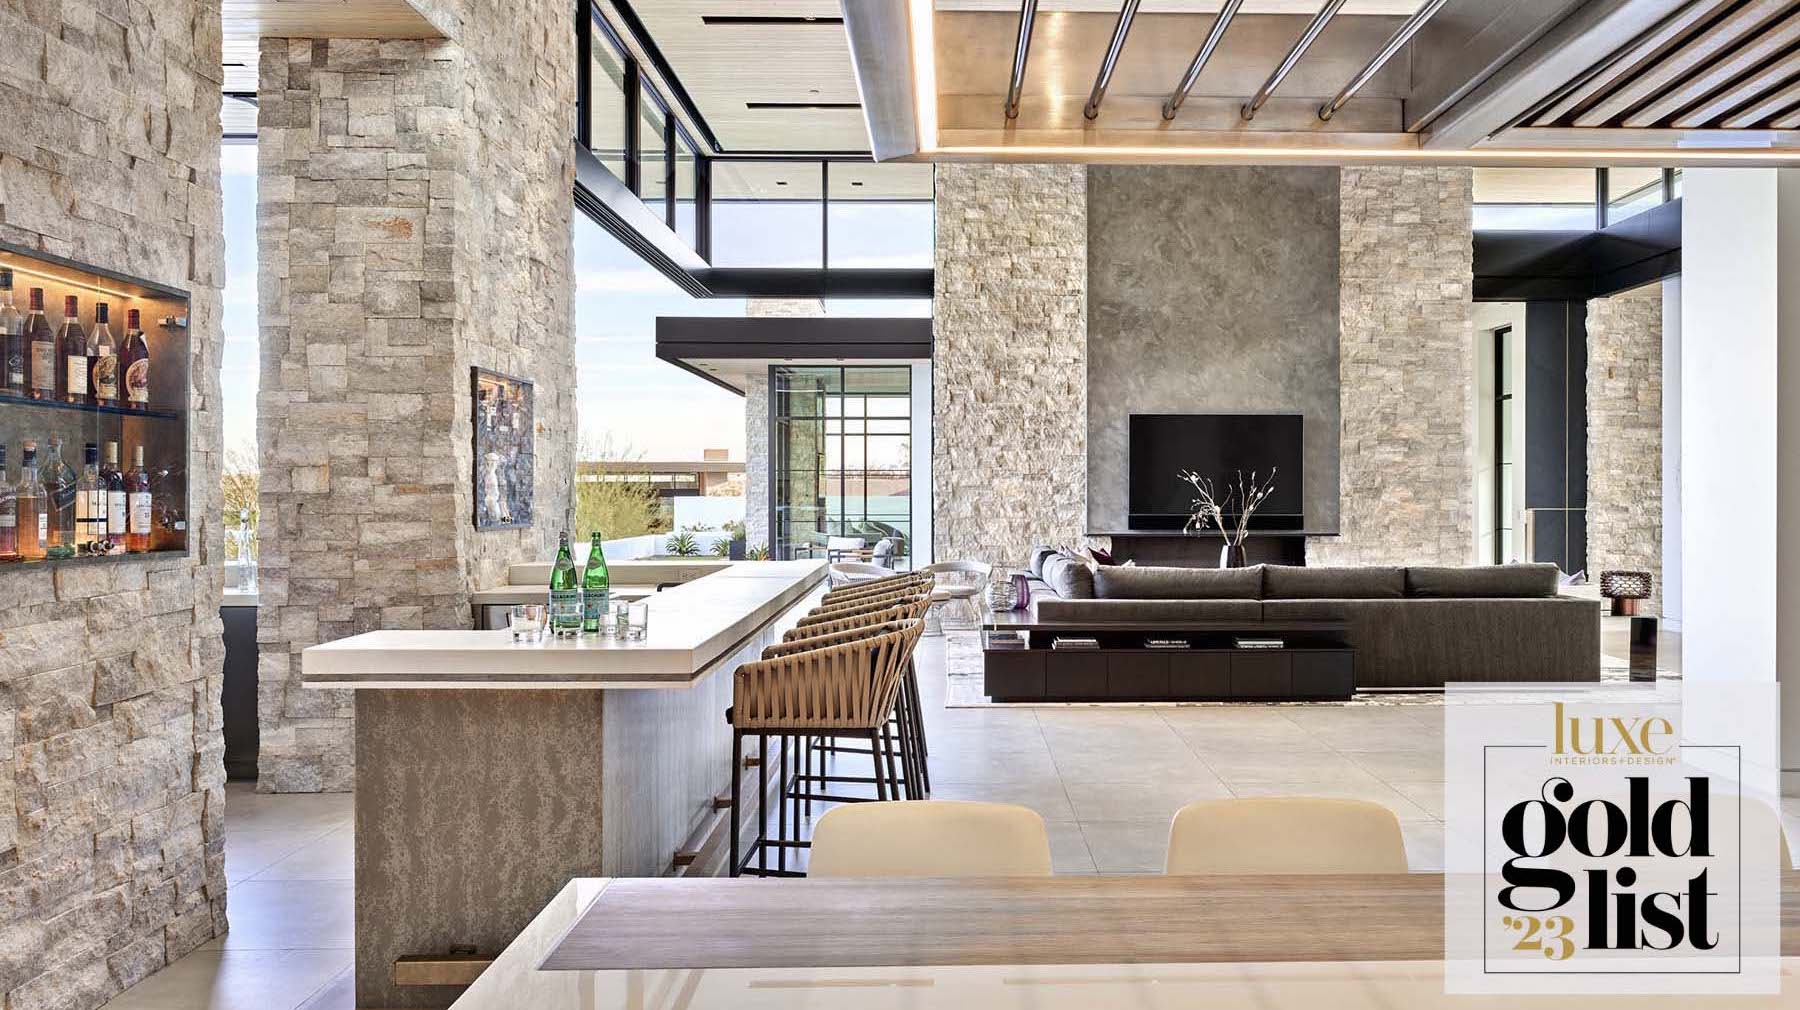 Feature Image Luxe Gold List 2023 Located in Scottsdale Ariz Drewett Works is an award winning architecture firm specializing in luxury residential hospitality and commercial architecture